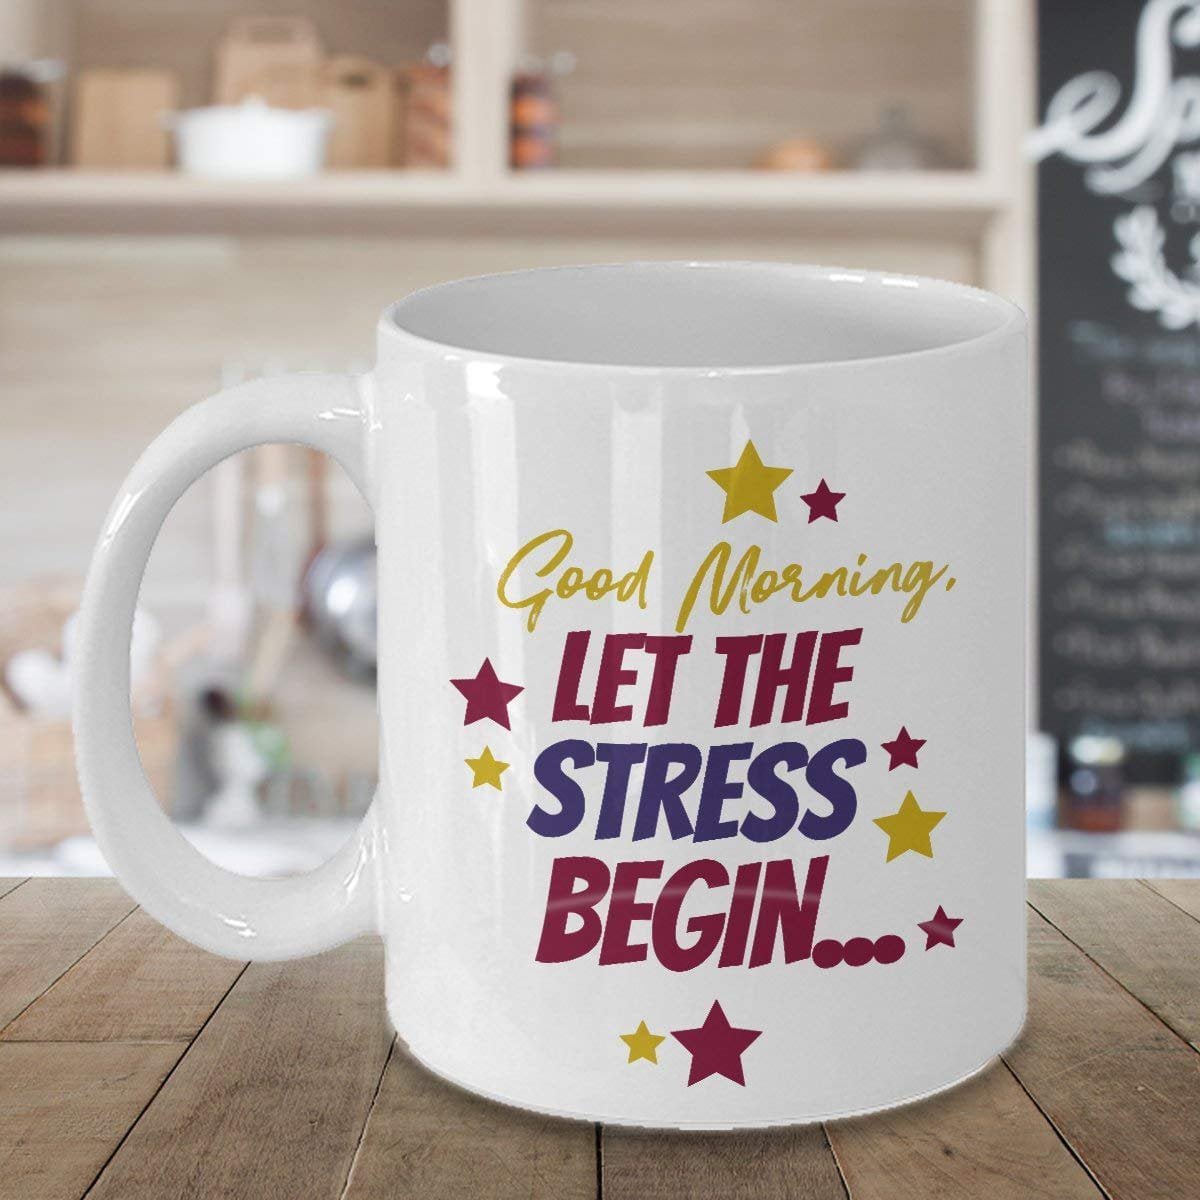 Hshbgiu Good Morning Let The Stress Begin Starry Coffee & Tea Gift Mug Cup For A Gorgeous Person Who Loves Sunshine 